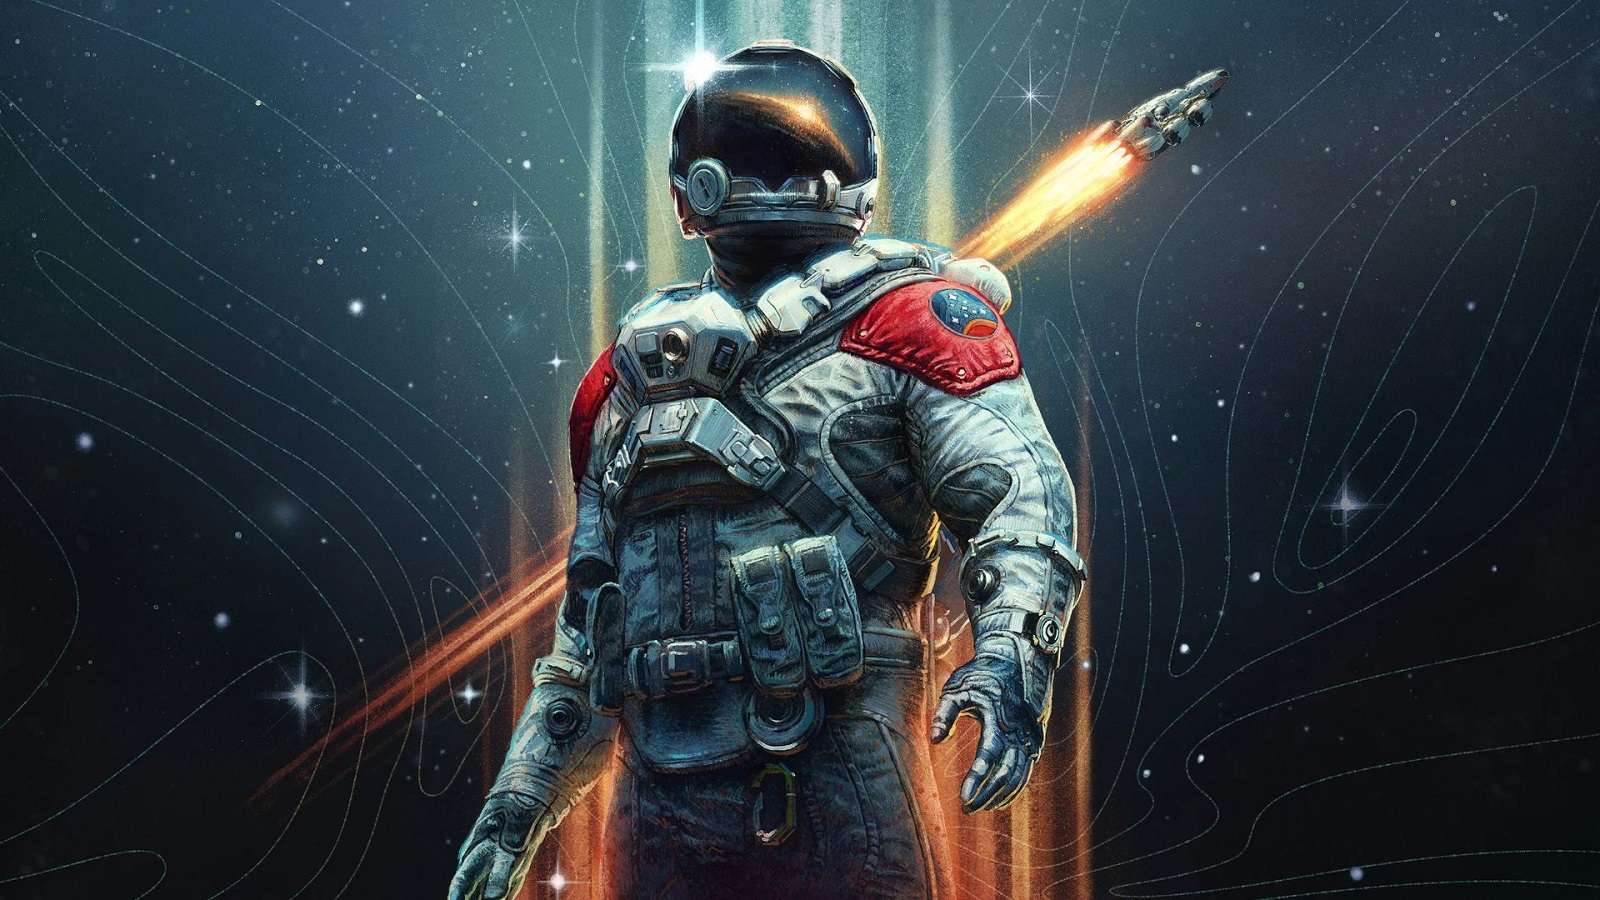 Starfield spacesuit and rocket